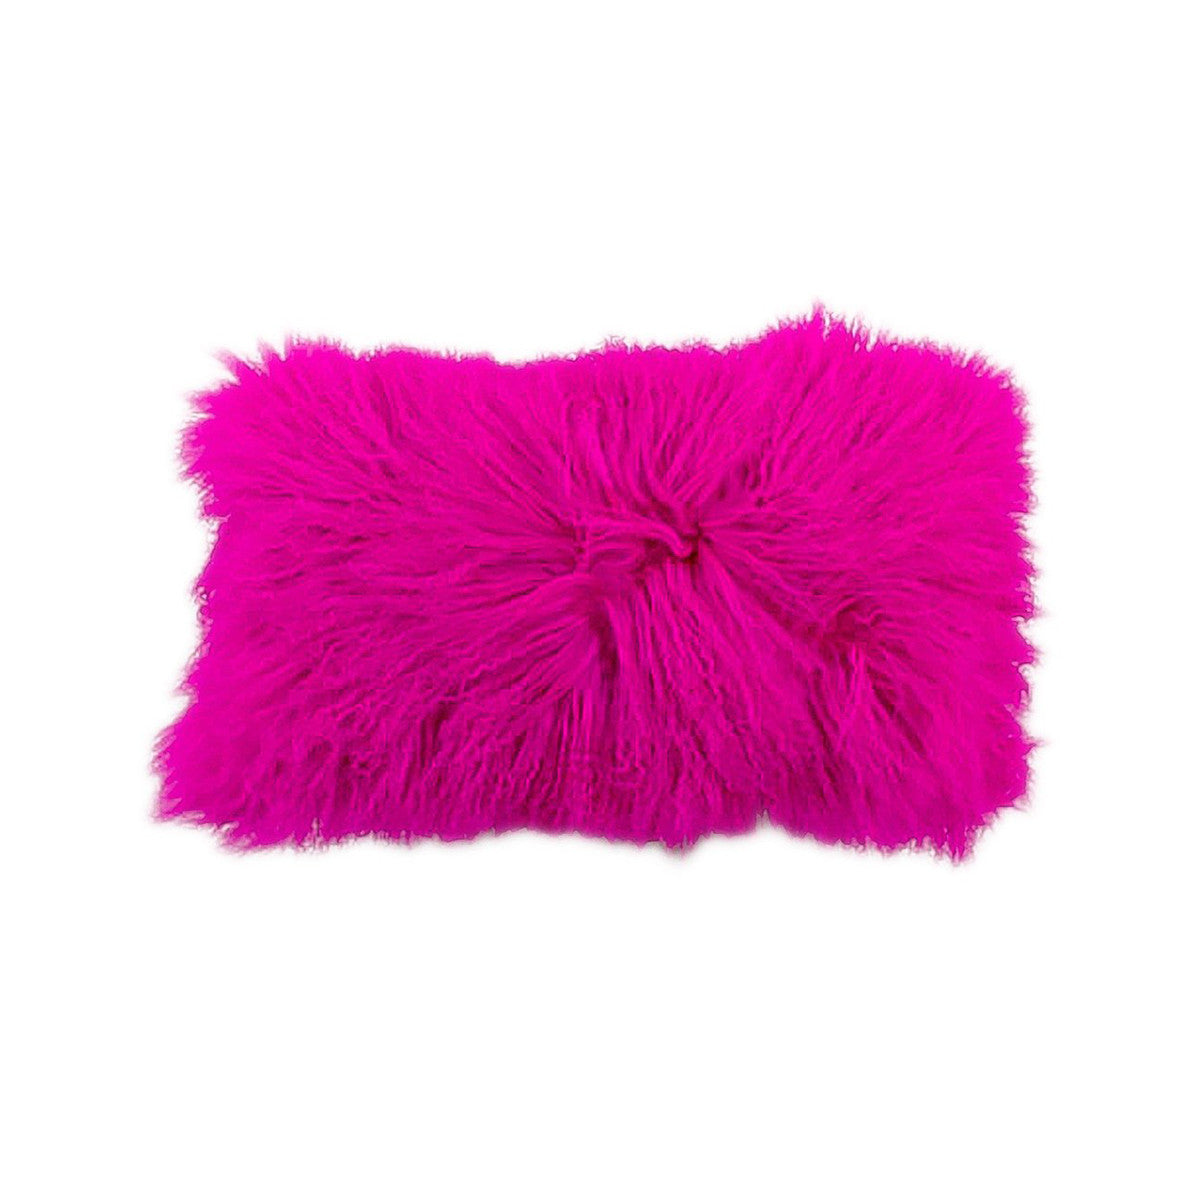 Tibetan lamp pillow in electric, energizing hot pink. Hot pink silk backing as well.